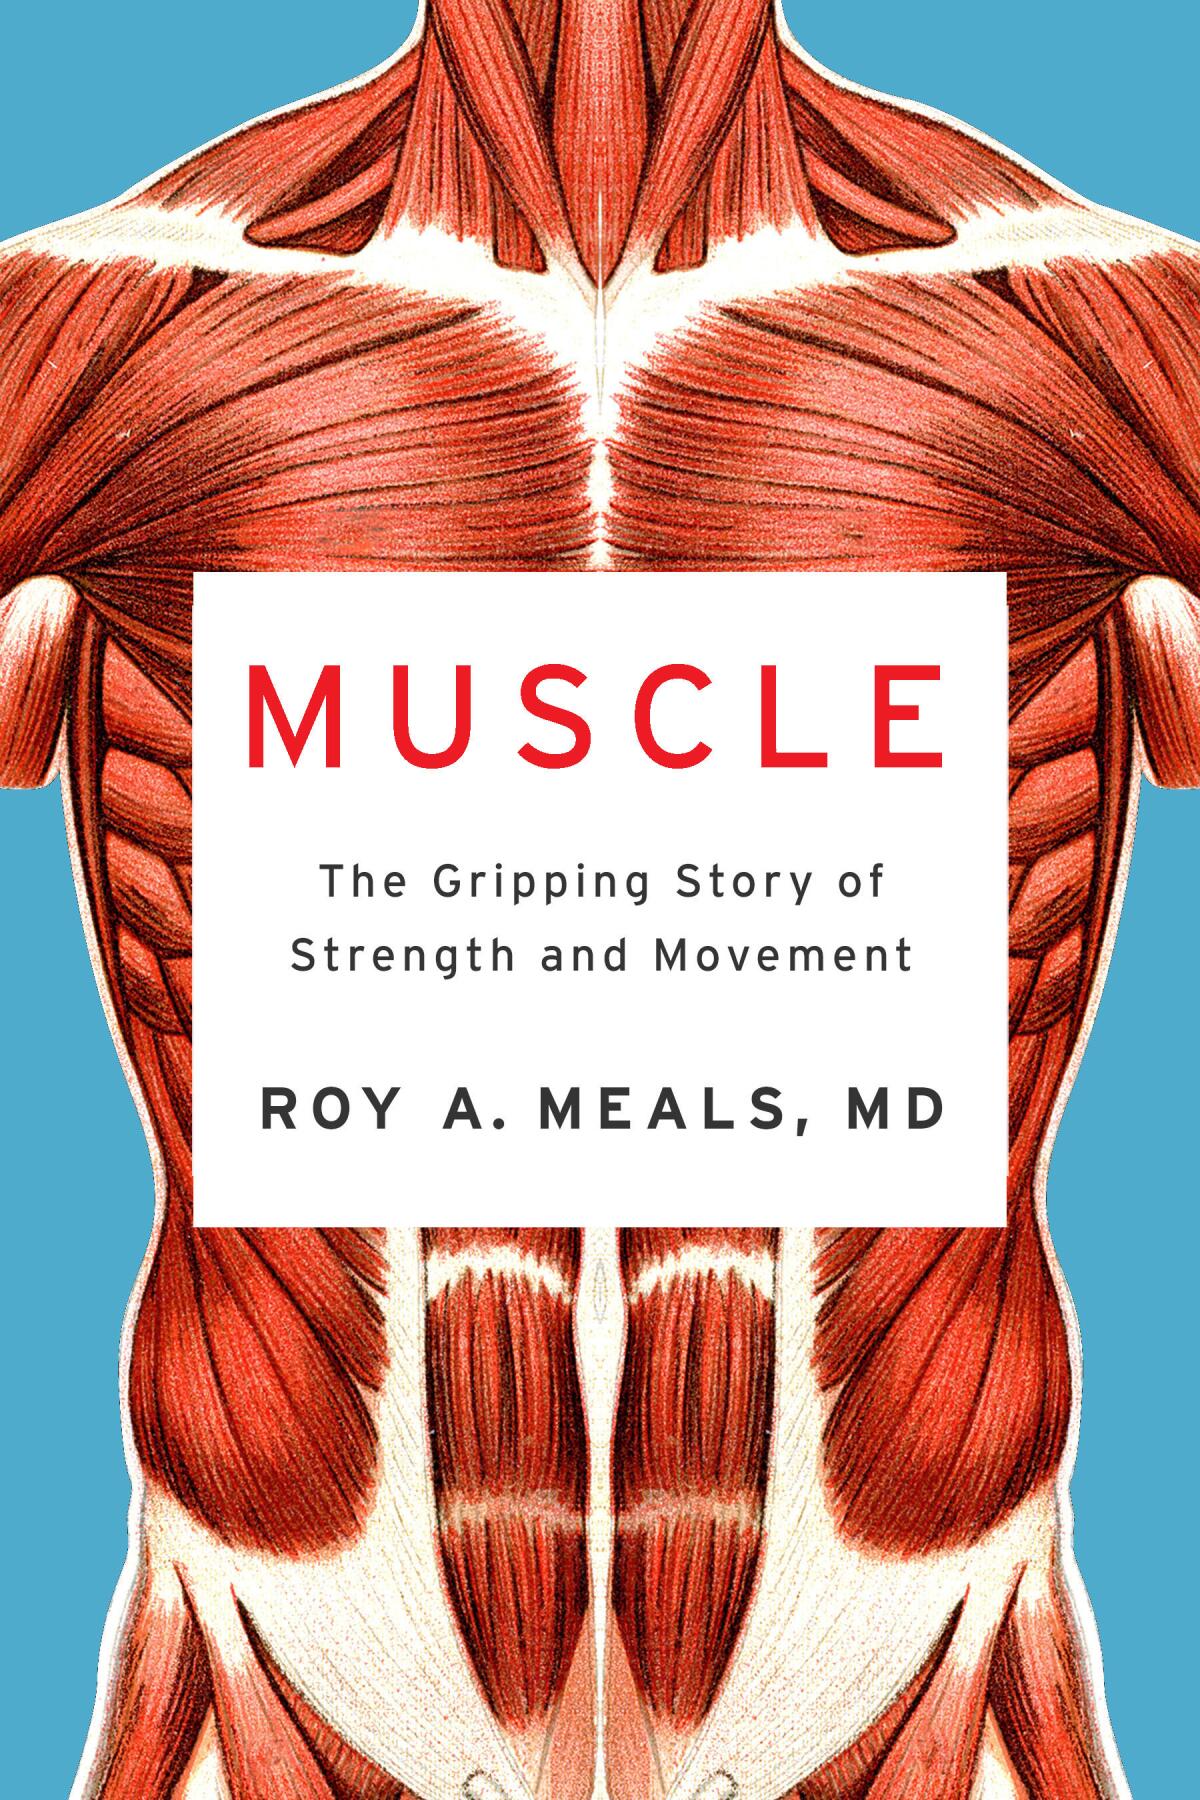  book cover for 'Muscle' by Roy A. Meals features a body at the muscle level